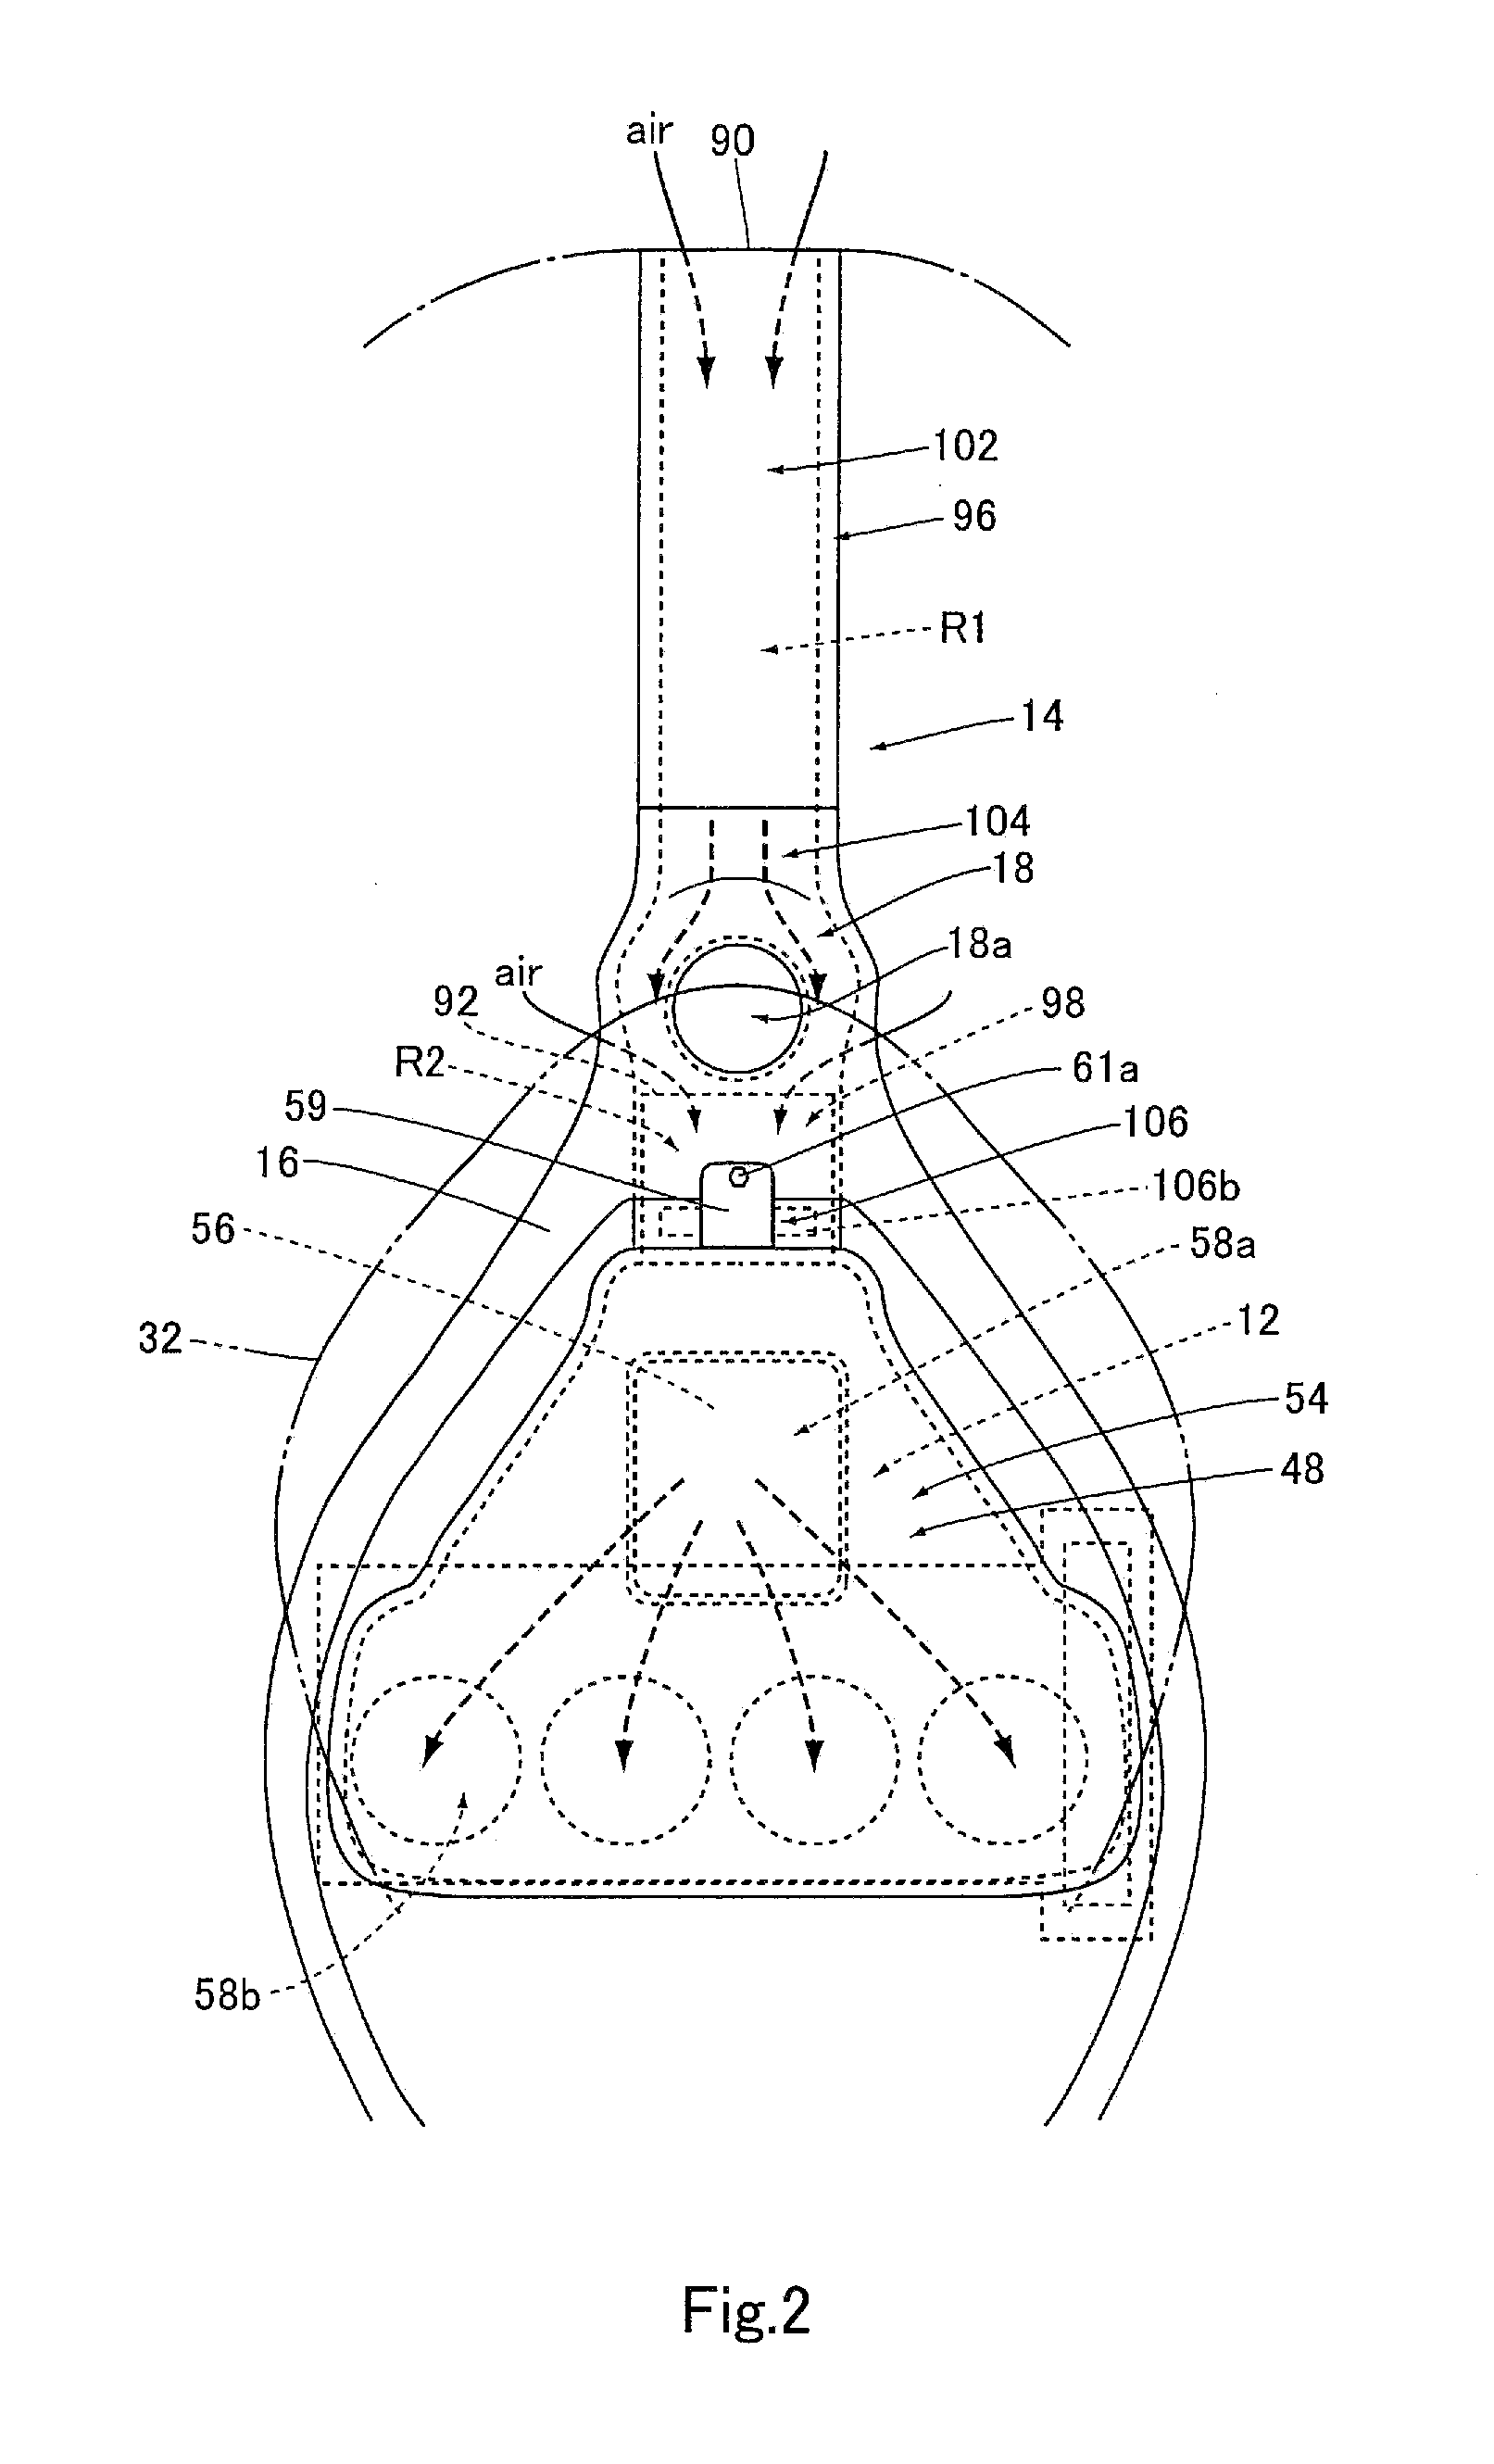 Air-intake structure of an engine